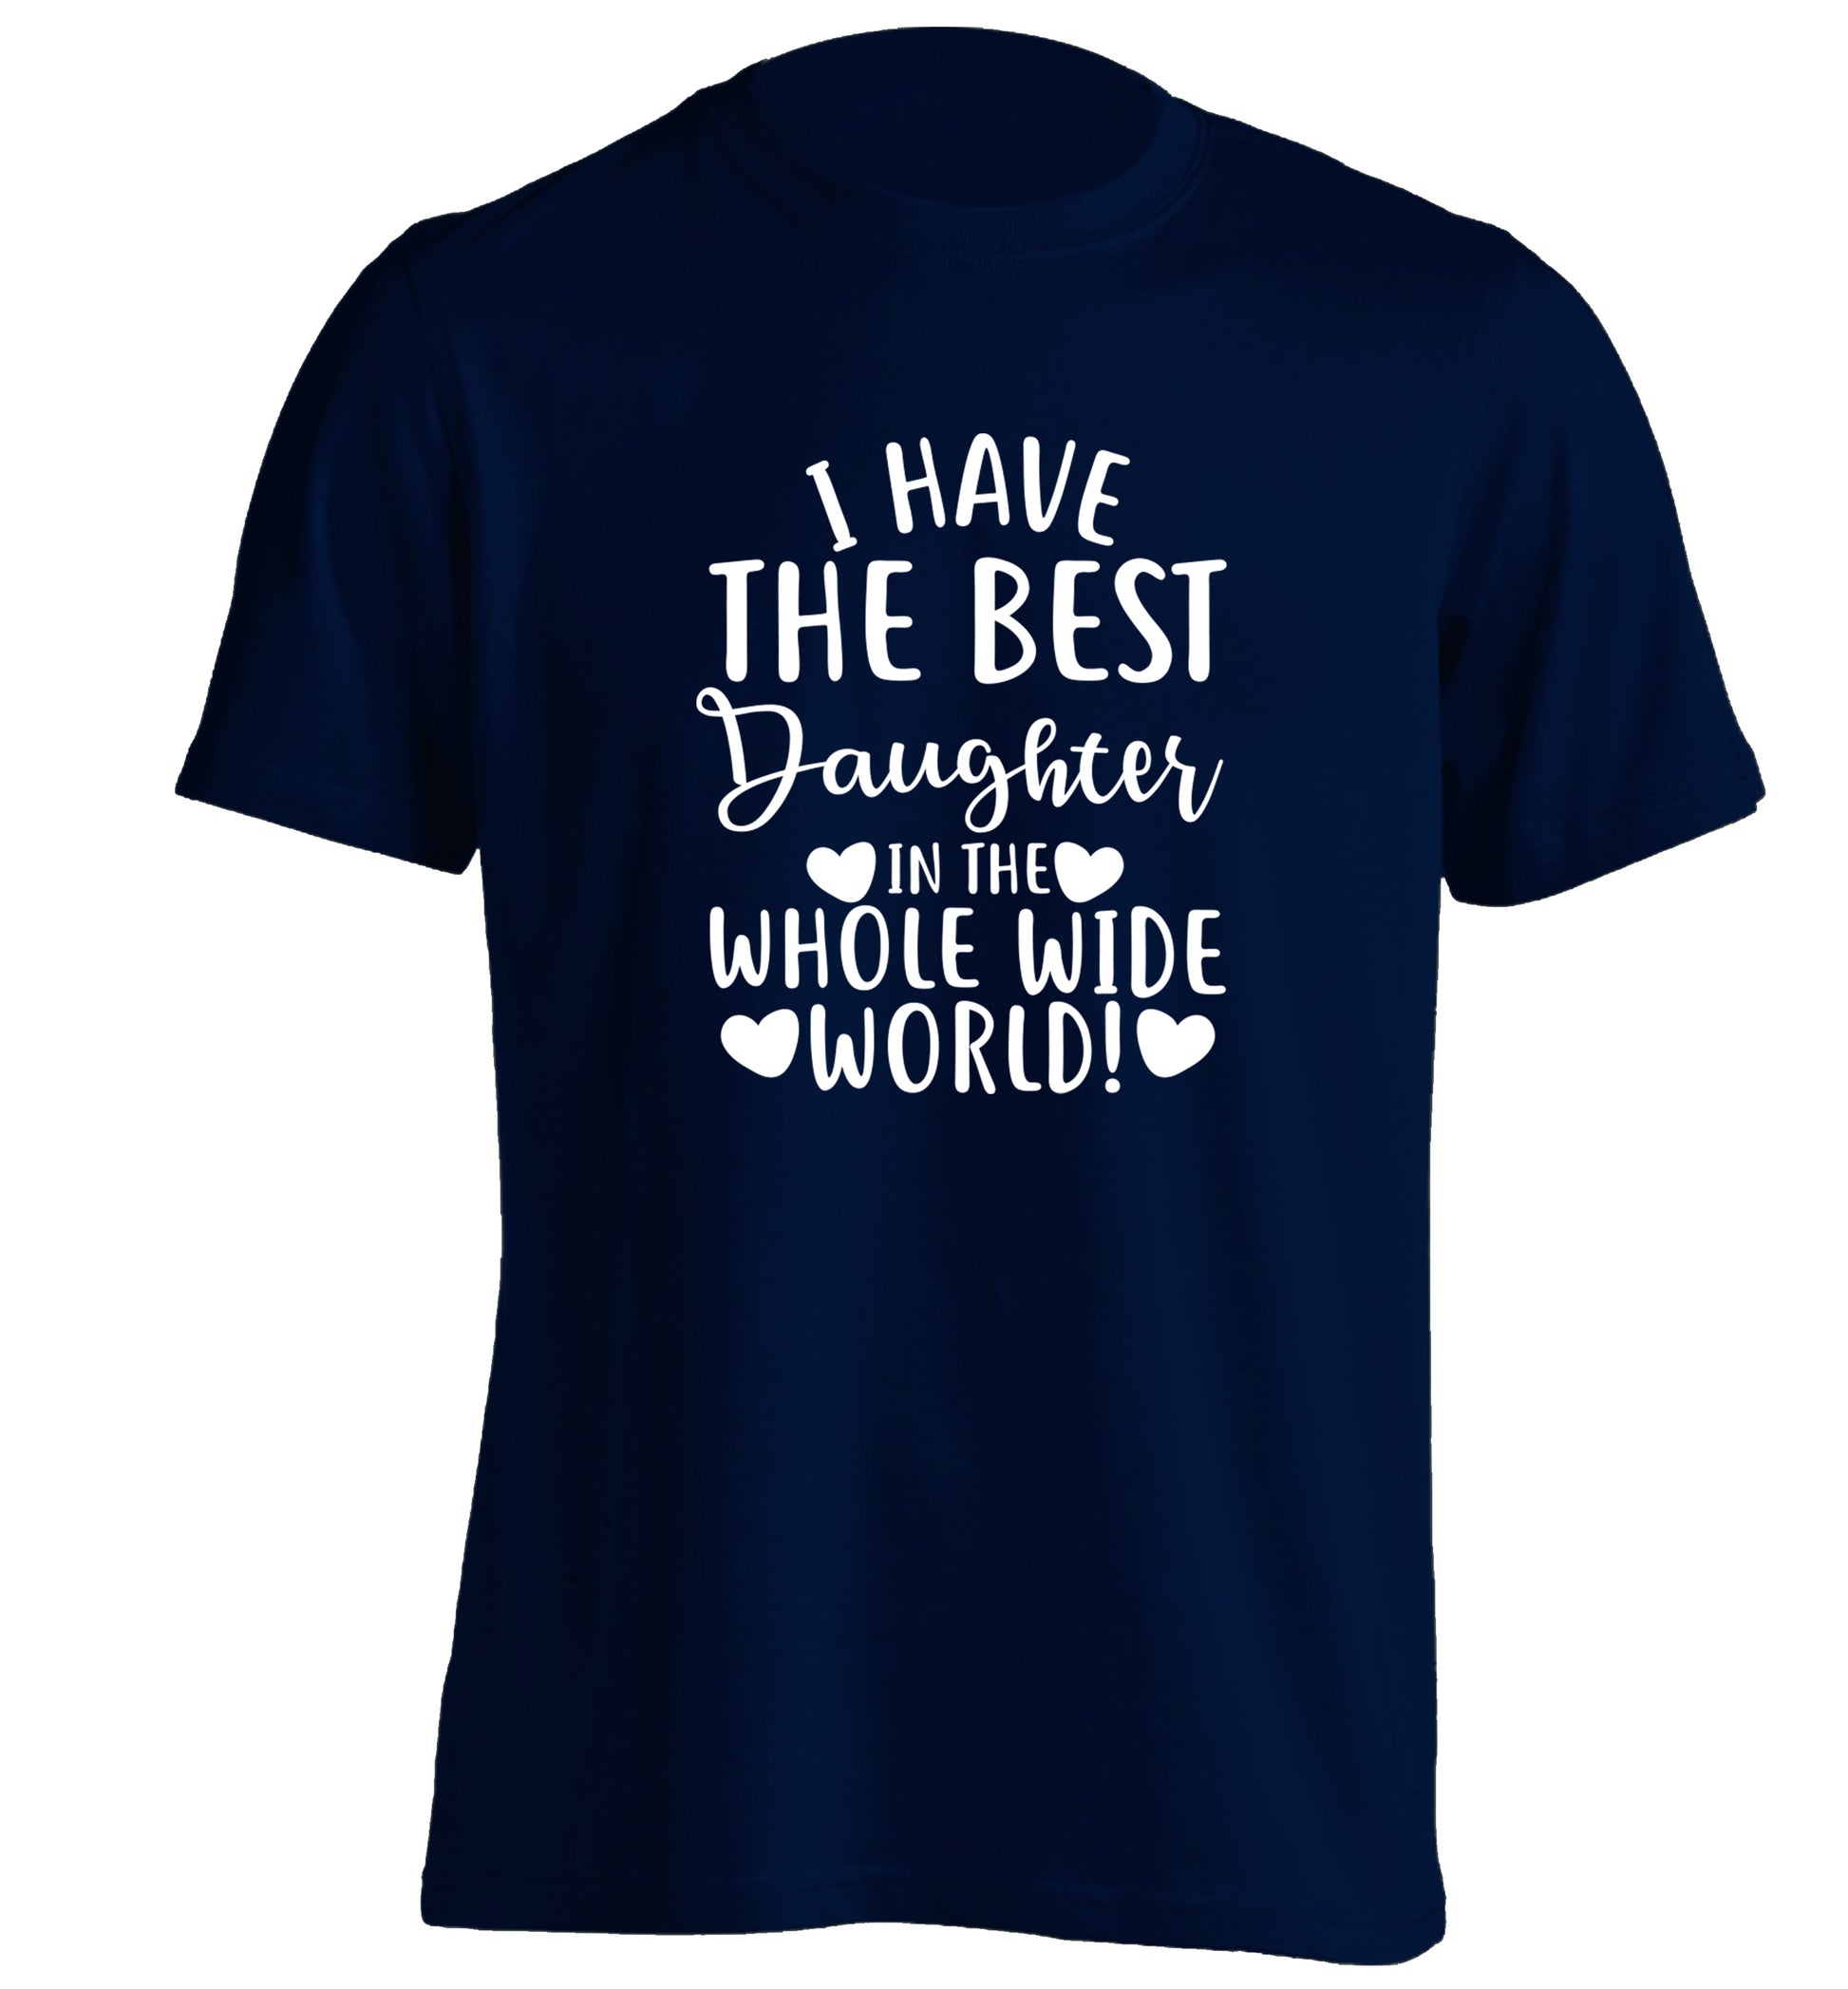 I have the best daughter in the whole wide world! adults unisex navy Tshirt 2XL